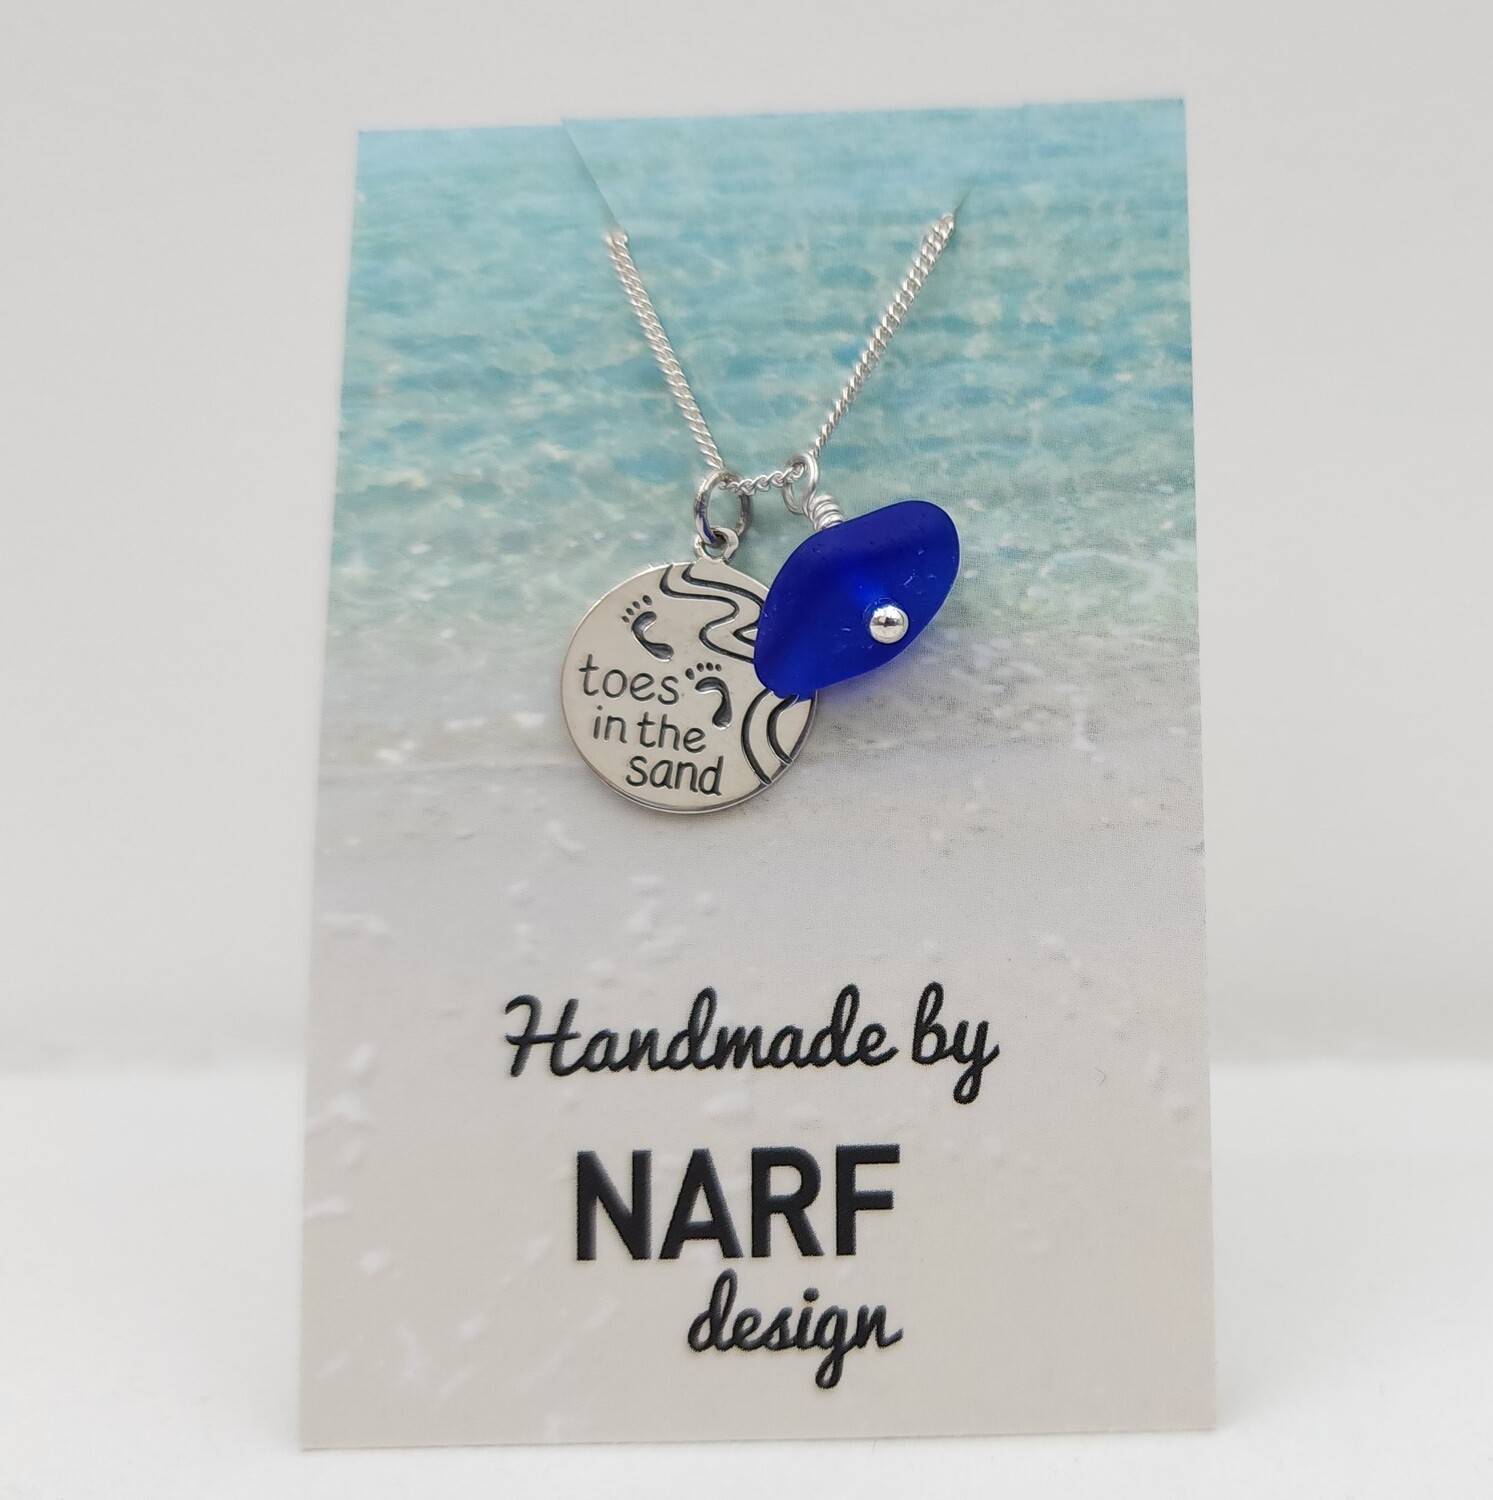 Blue Lake Erie Beach Glass Necklace with "Toes in the Sand" Charm